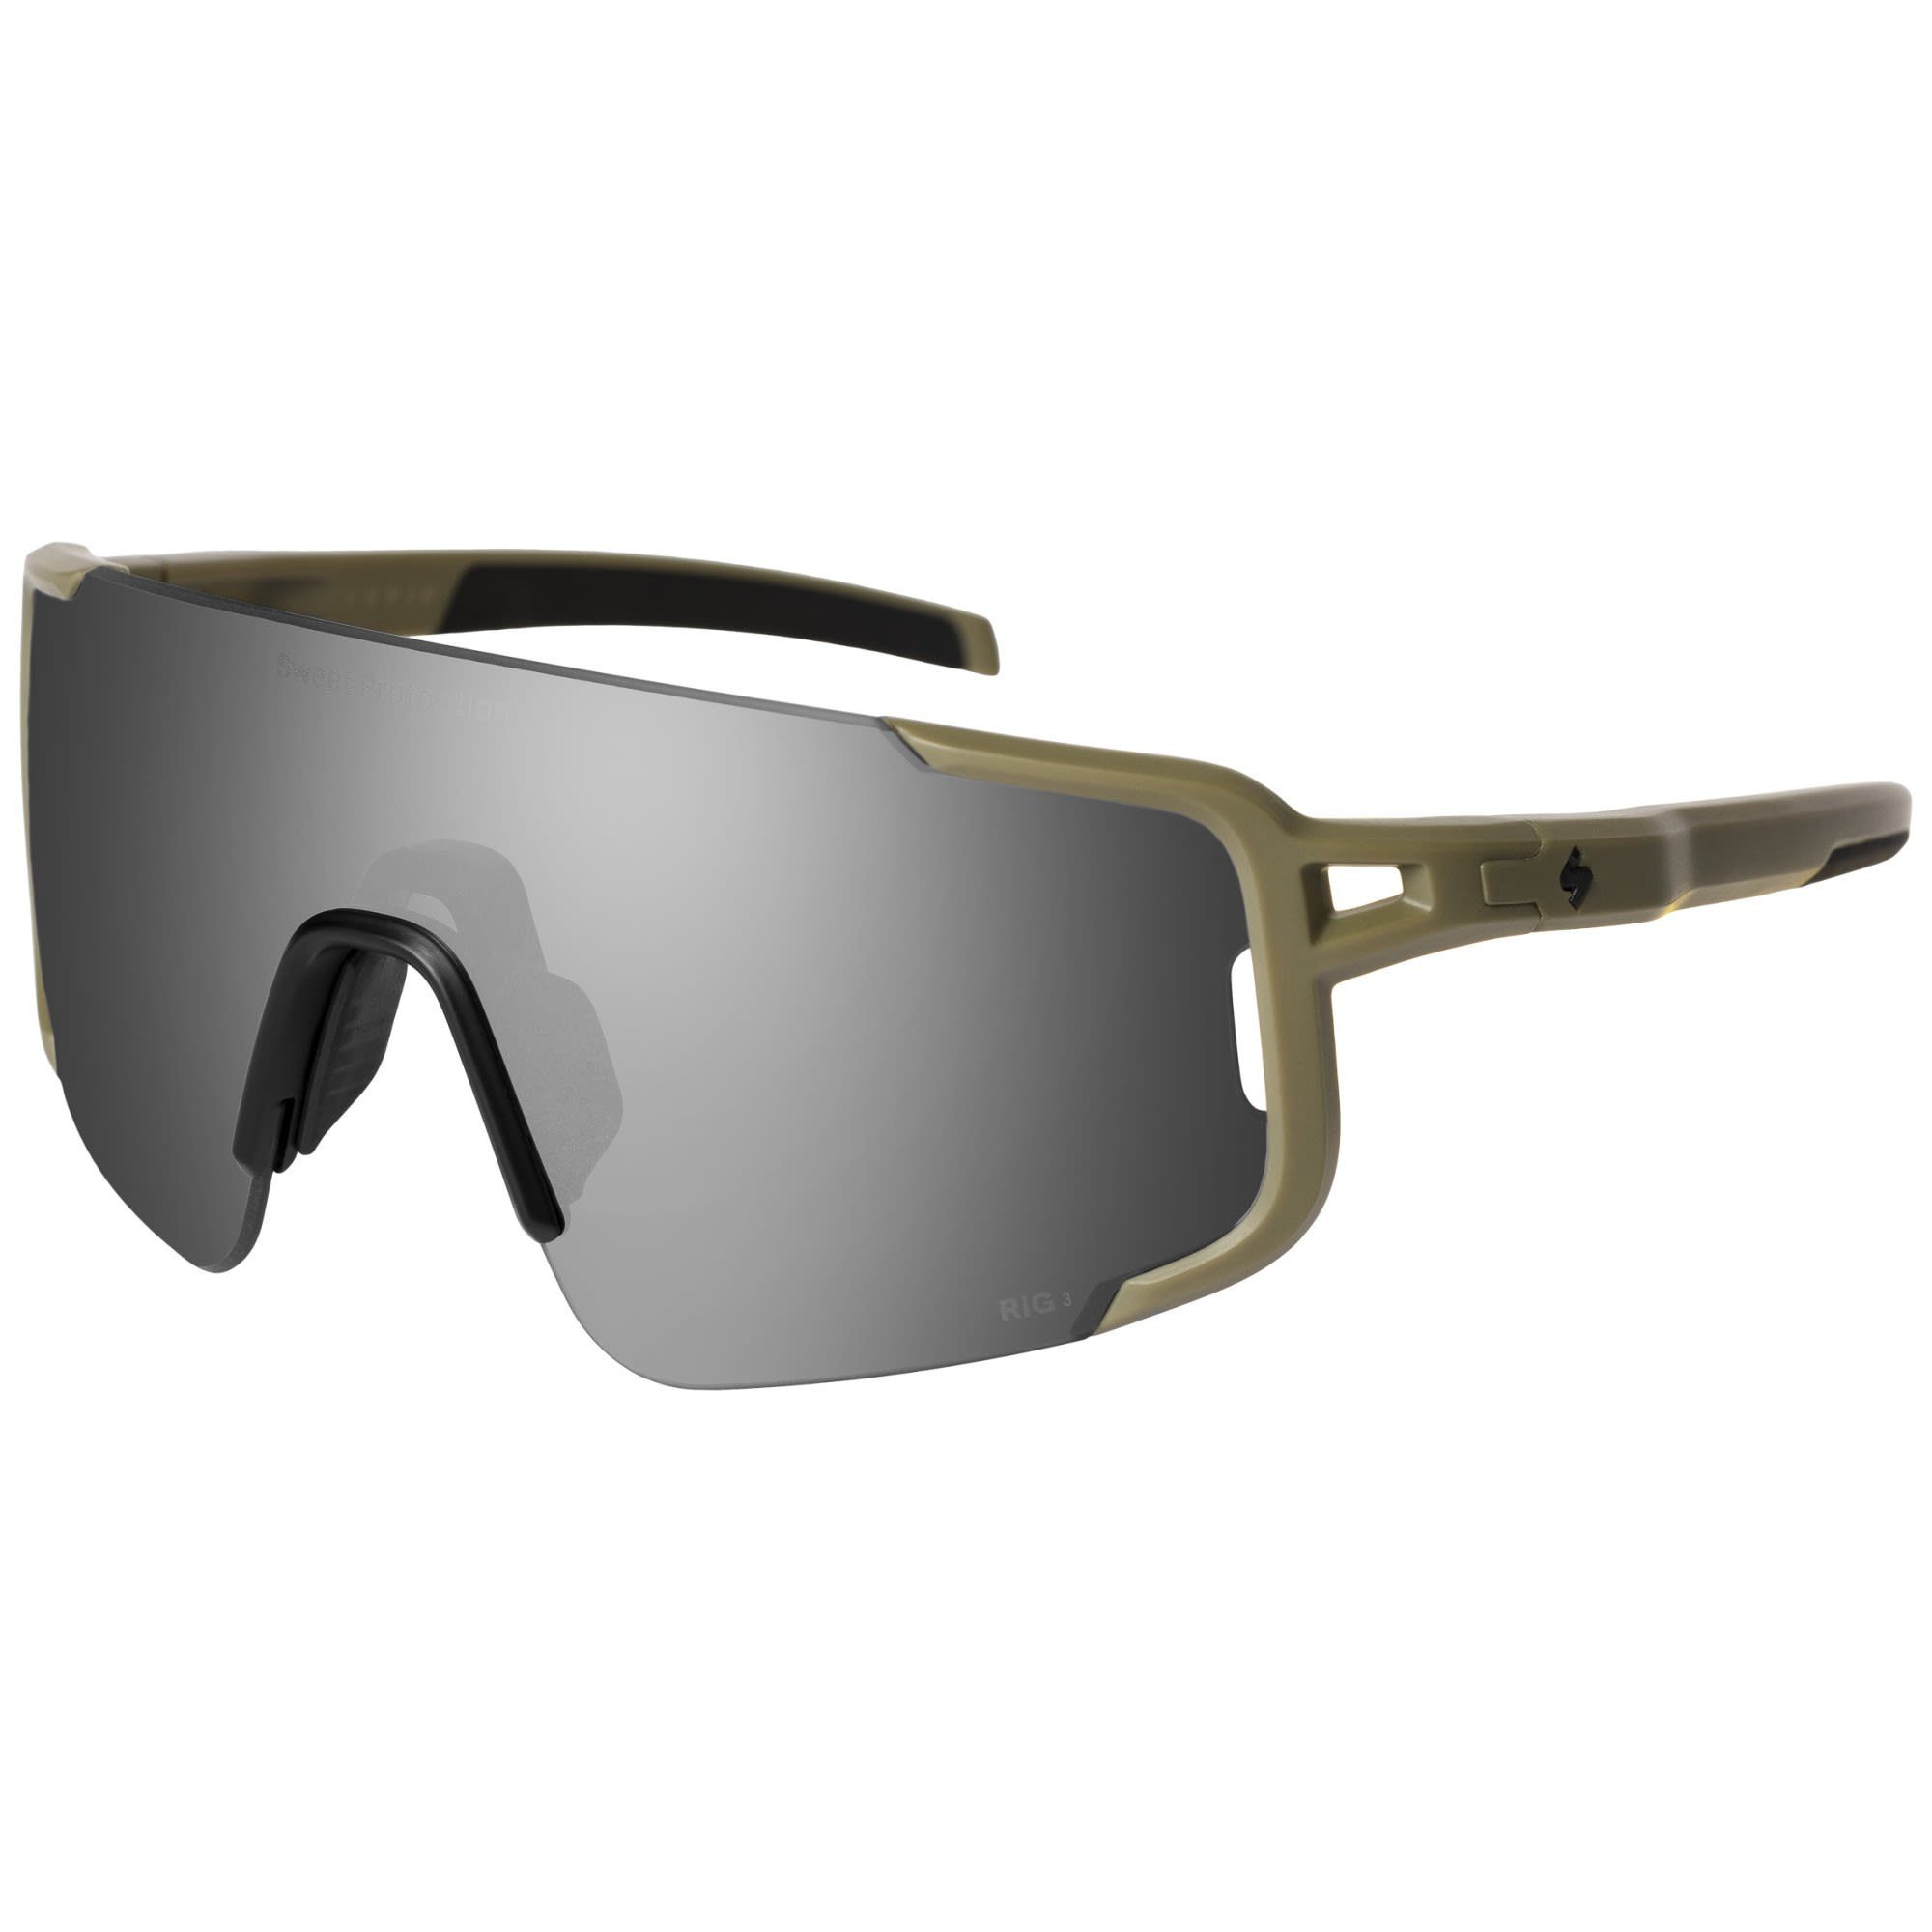 Woodland Sweet Ronin Fahrradbrille Sweet Protection Obsidian - Reflect RIG Rig Accessoires Protection